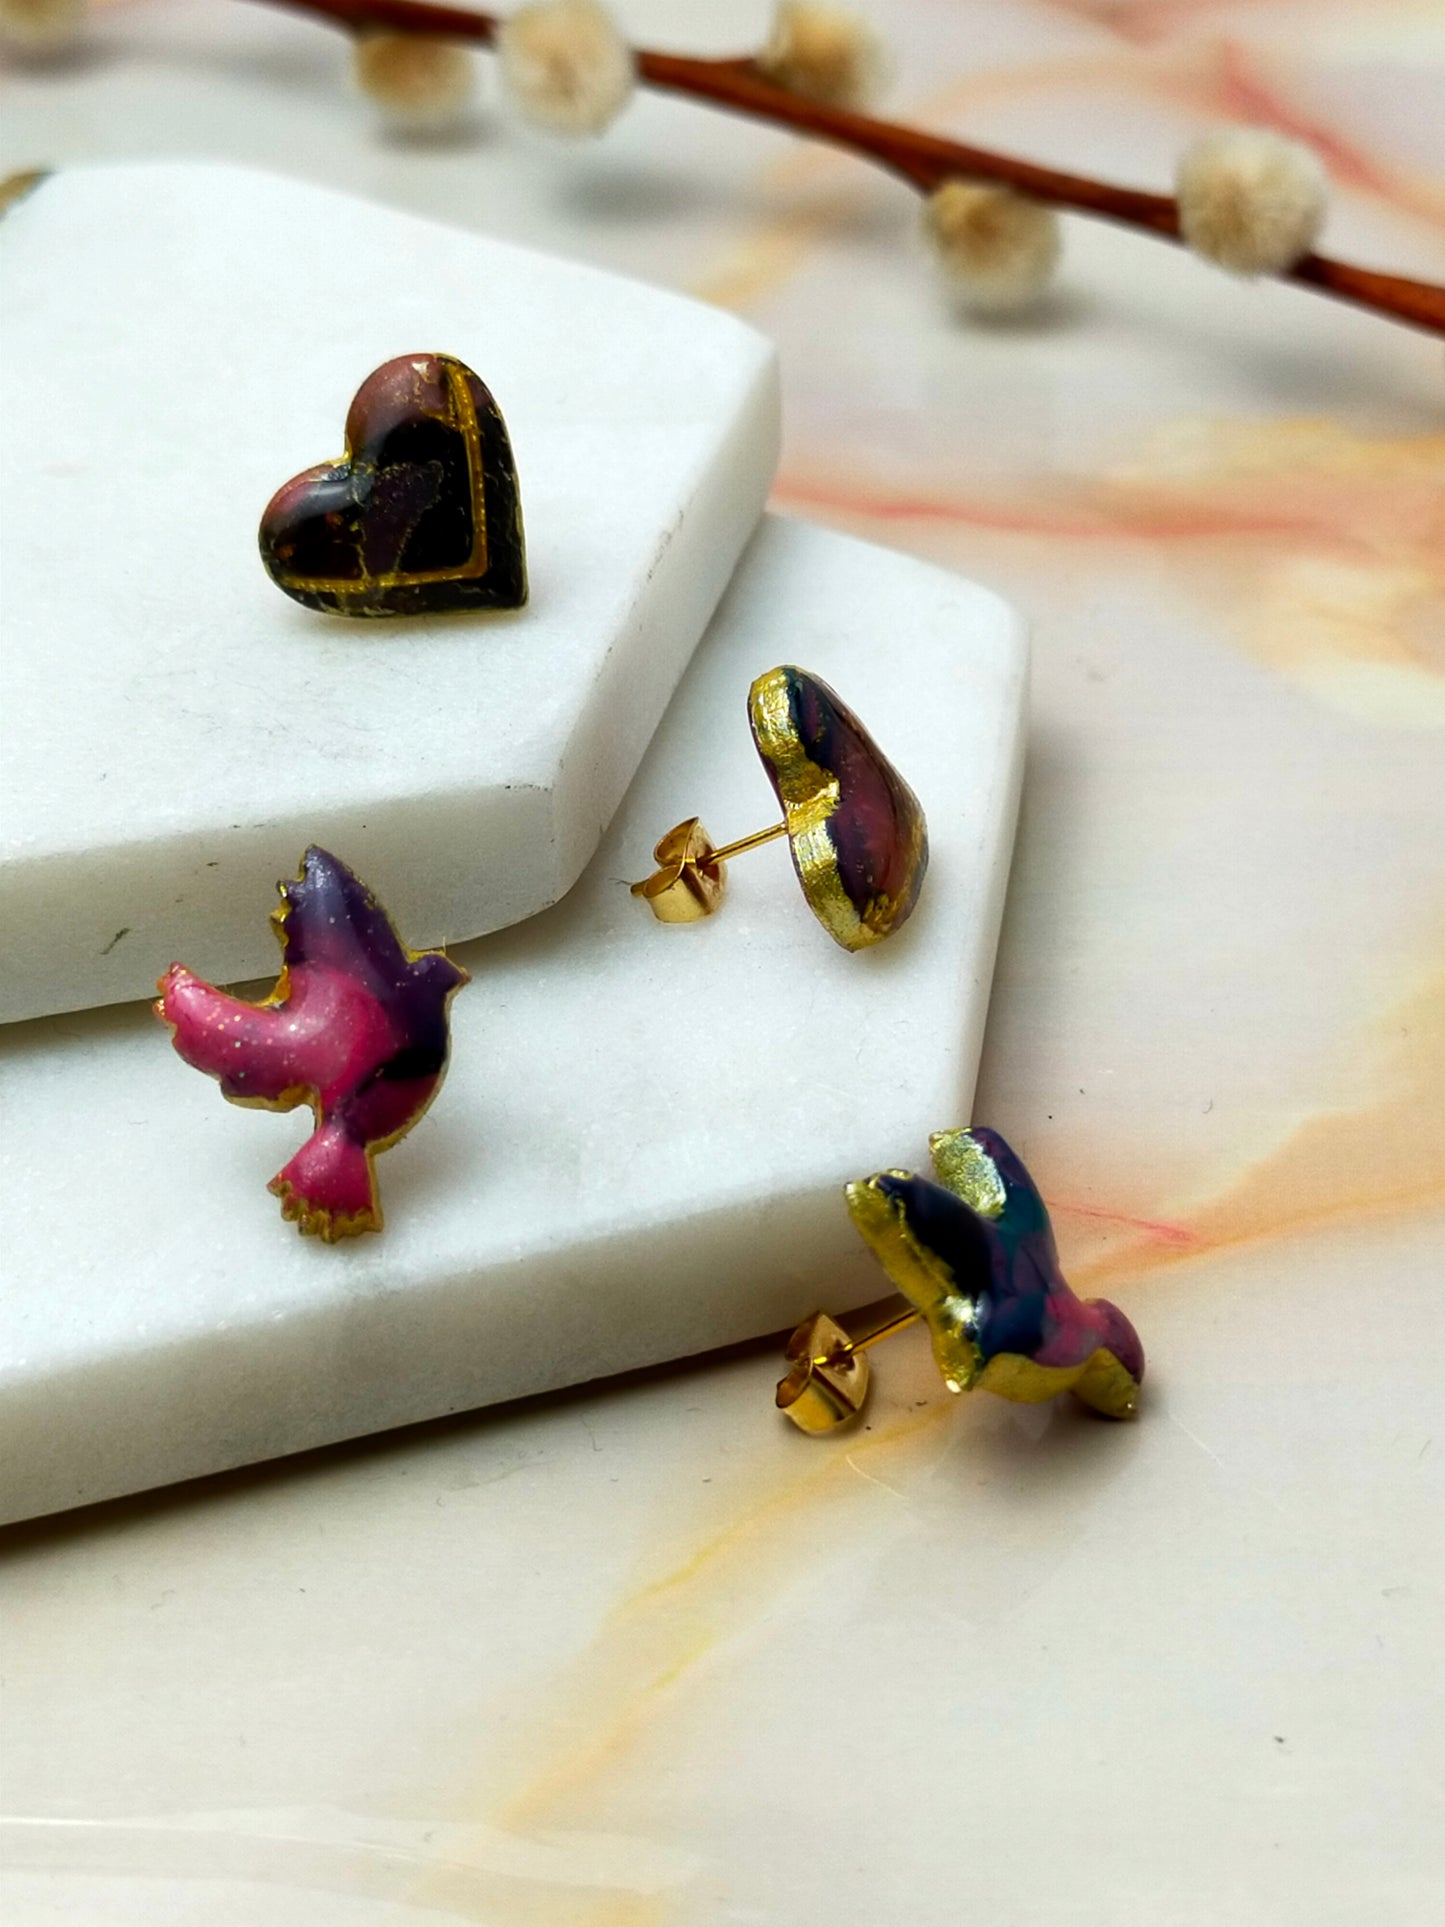 "Paloma" 2 Pack Set - Hearts Stud Earrings and Love Bird Stud Earrings - Valentine's Collection